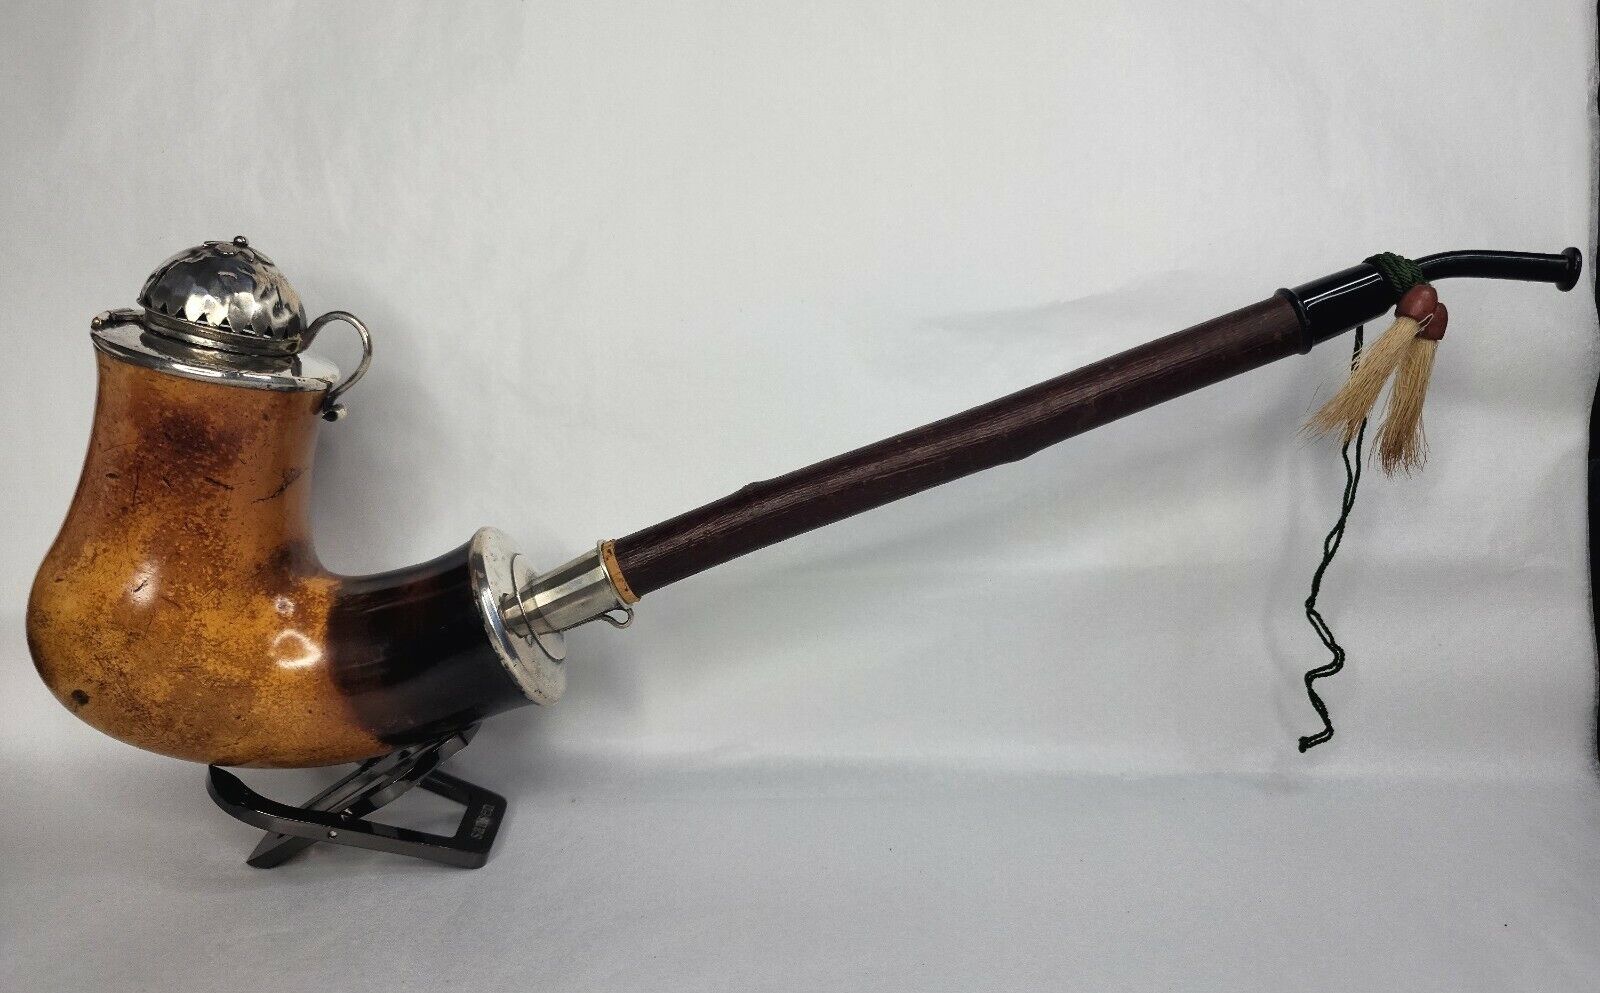 Large Victorian Antique Meerschaum Pipe, Silver Mounted With Cherry Wood Stem